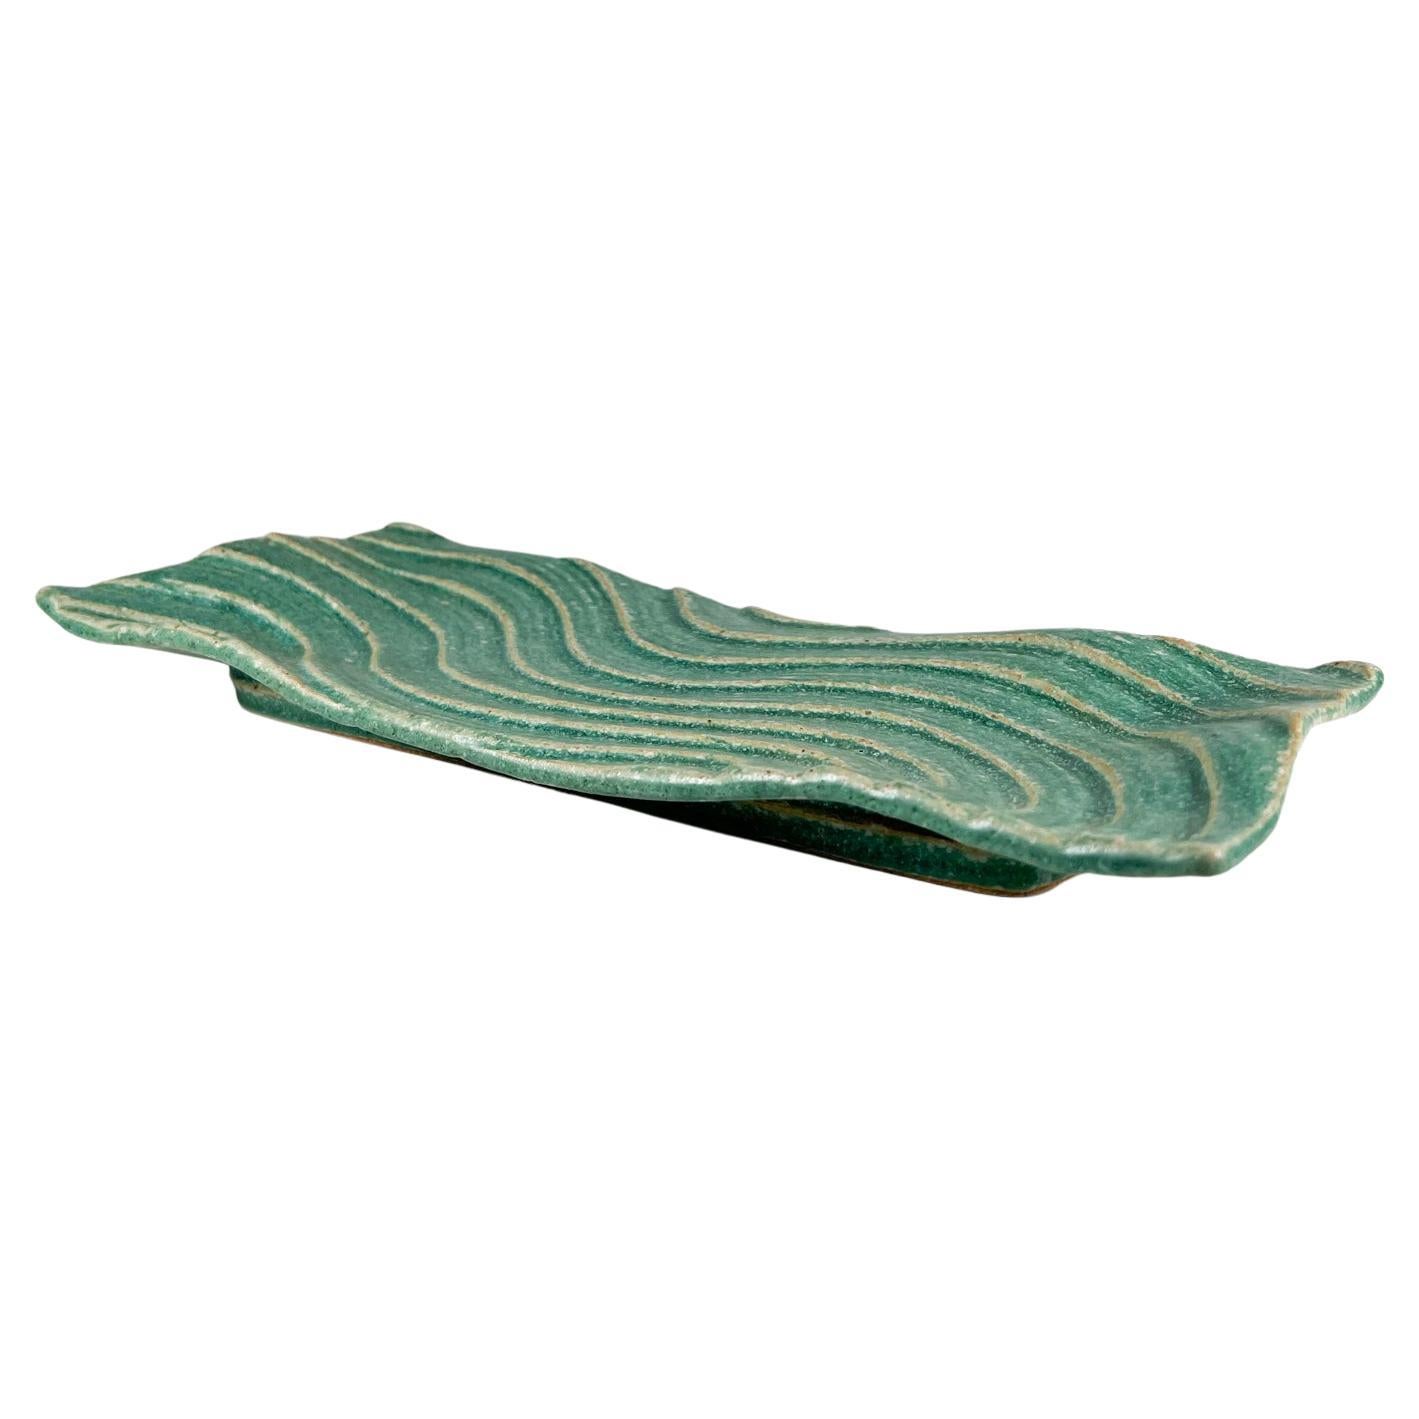 Mid-Century Modern 1970s Sculptural Green Wave Dish Studio Pottery Art Ed Thompson For Sale